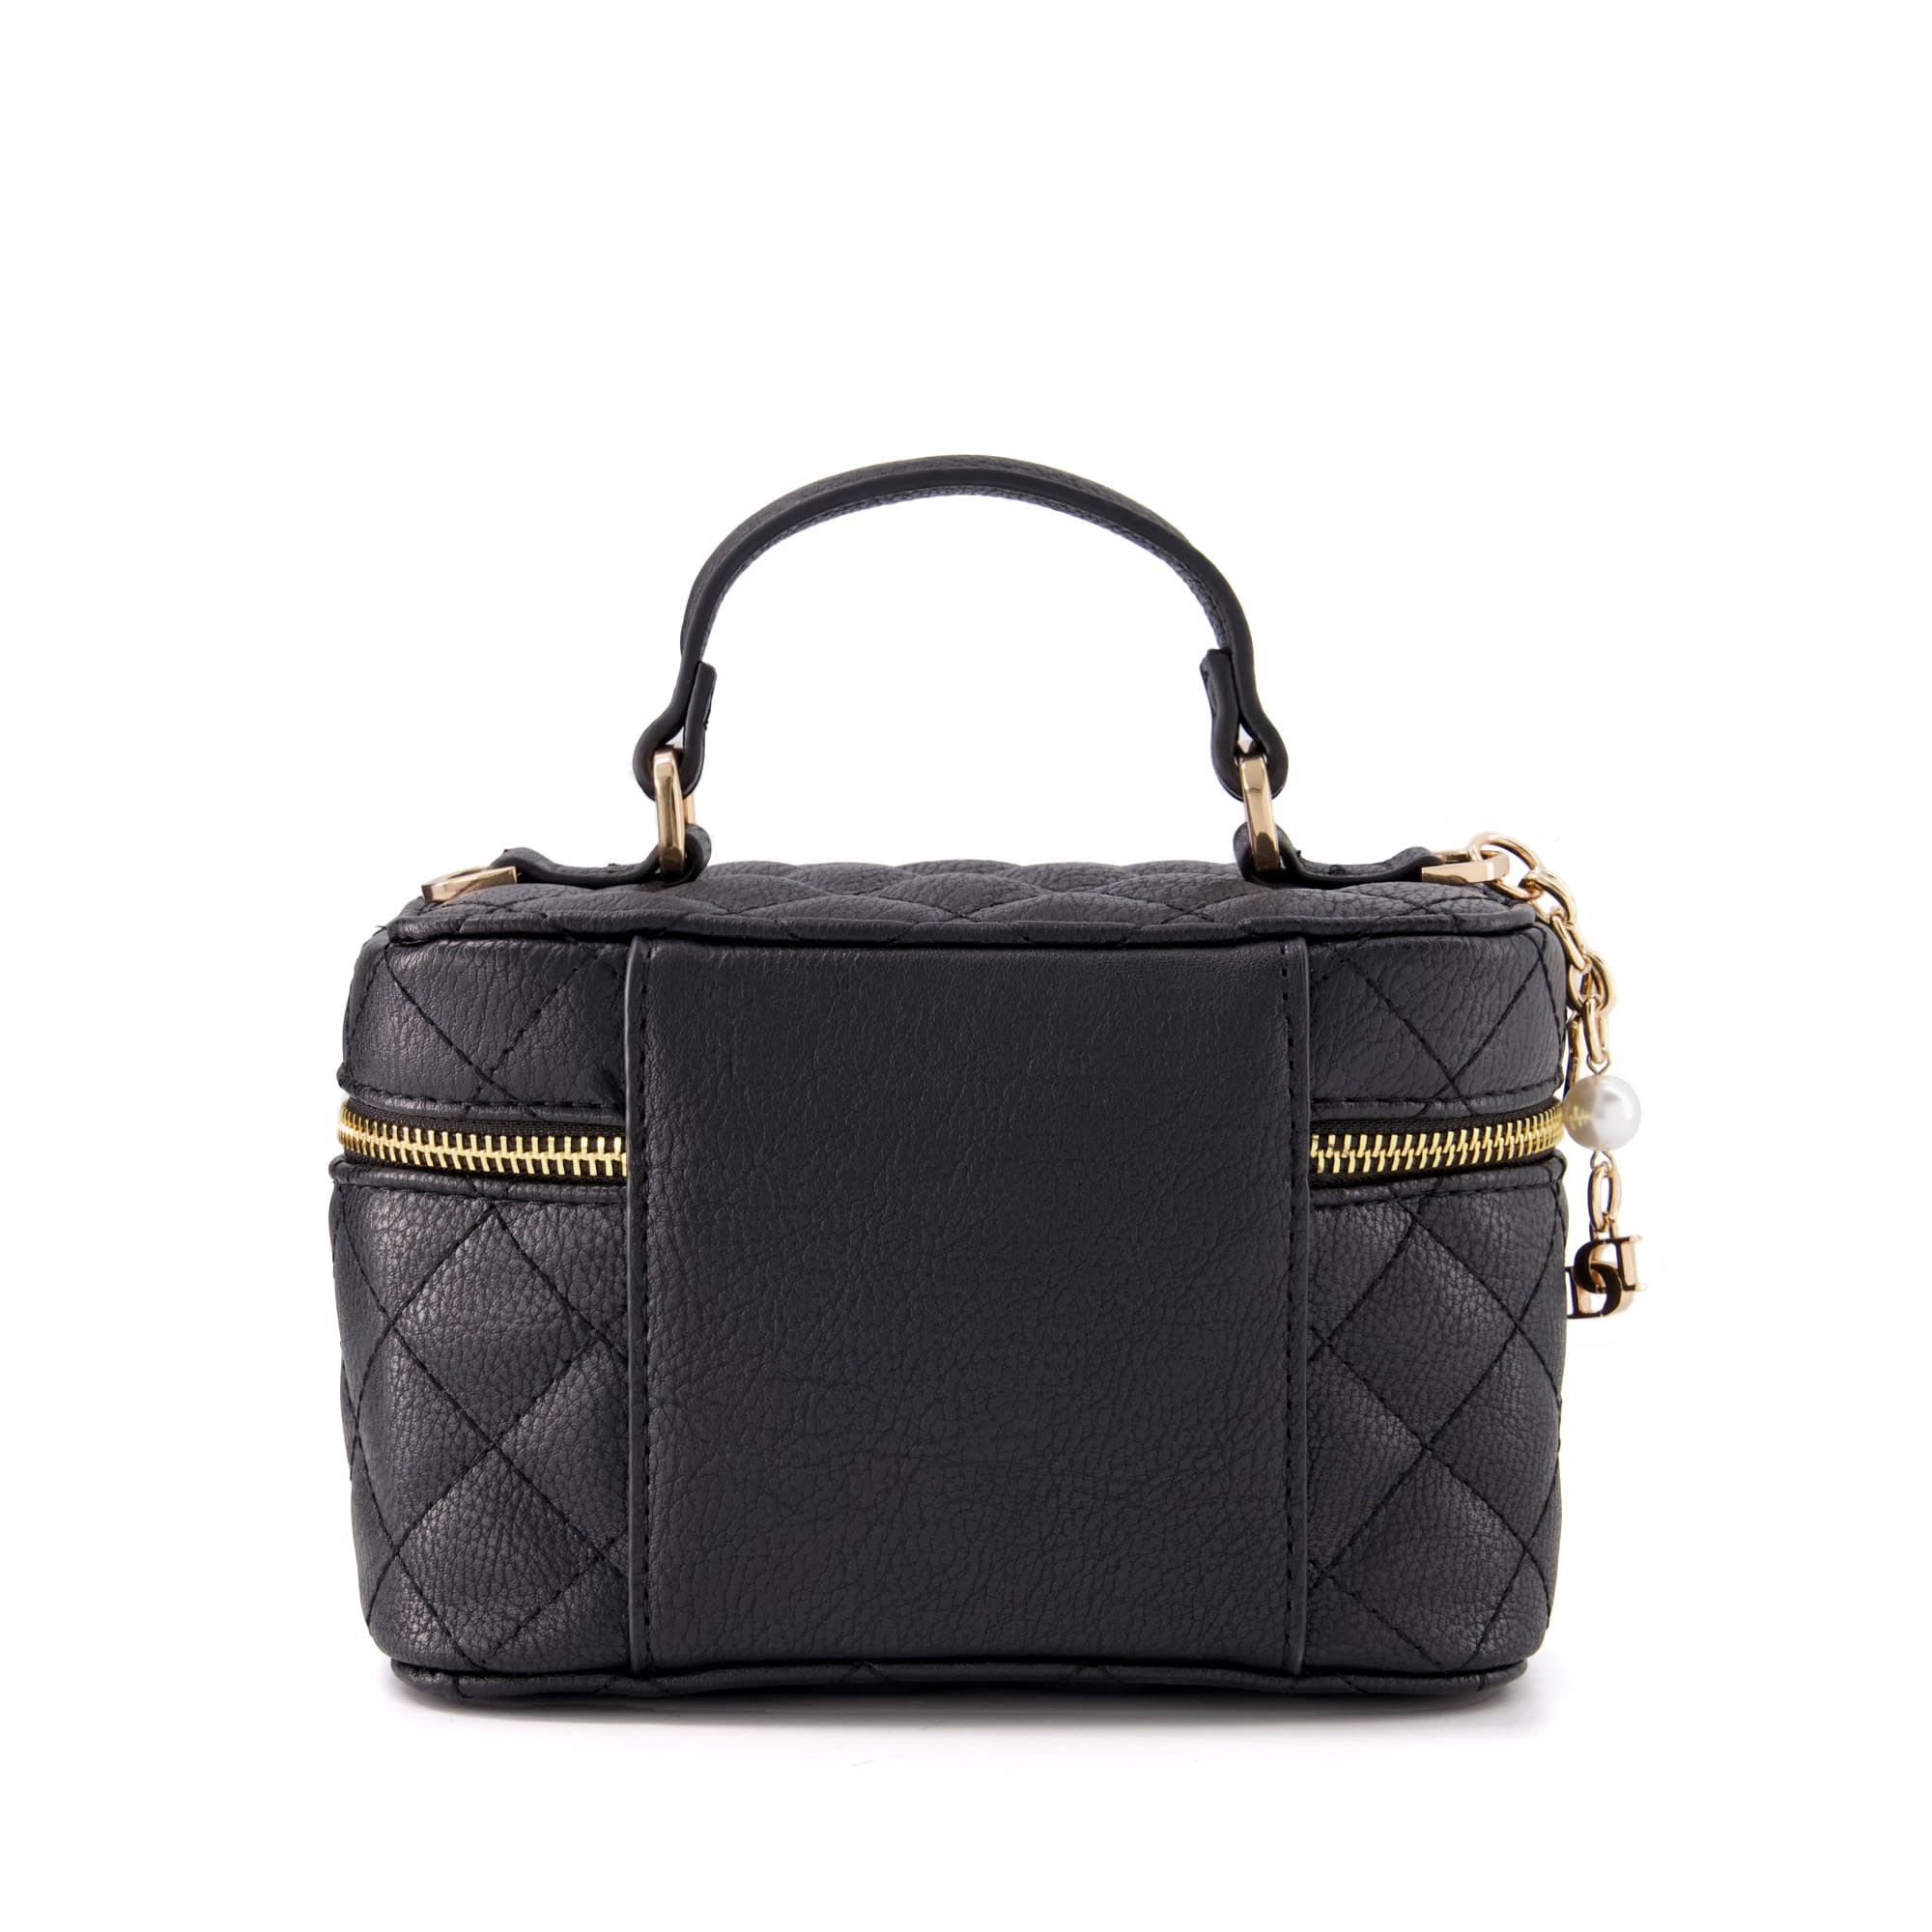 The stylish way to pack all your beauty essentials. Made from chic quilted faux-leather the gold zip opens up to reveal the central compartment and an internal mirror. The decorative gold inital logo, star and pearl charms add to the elegant look. Fe